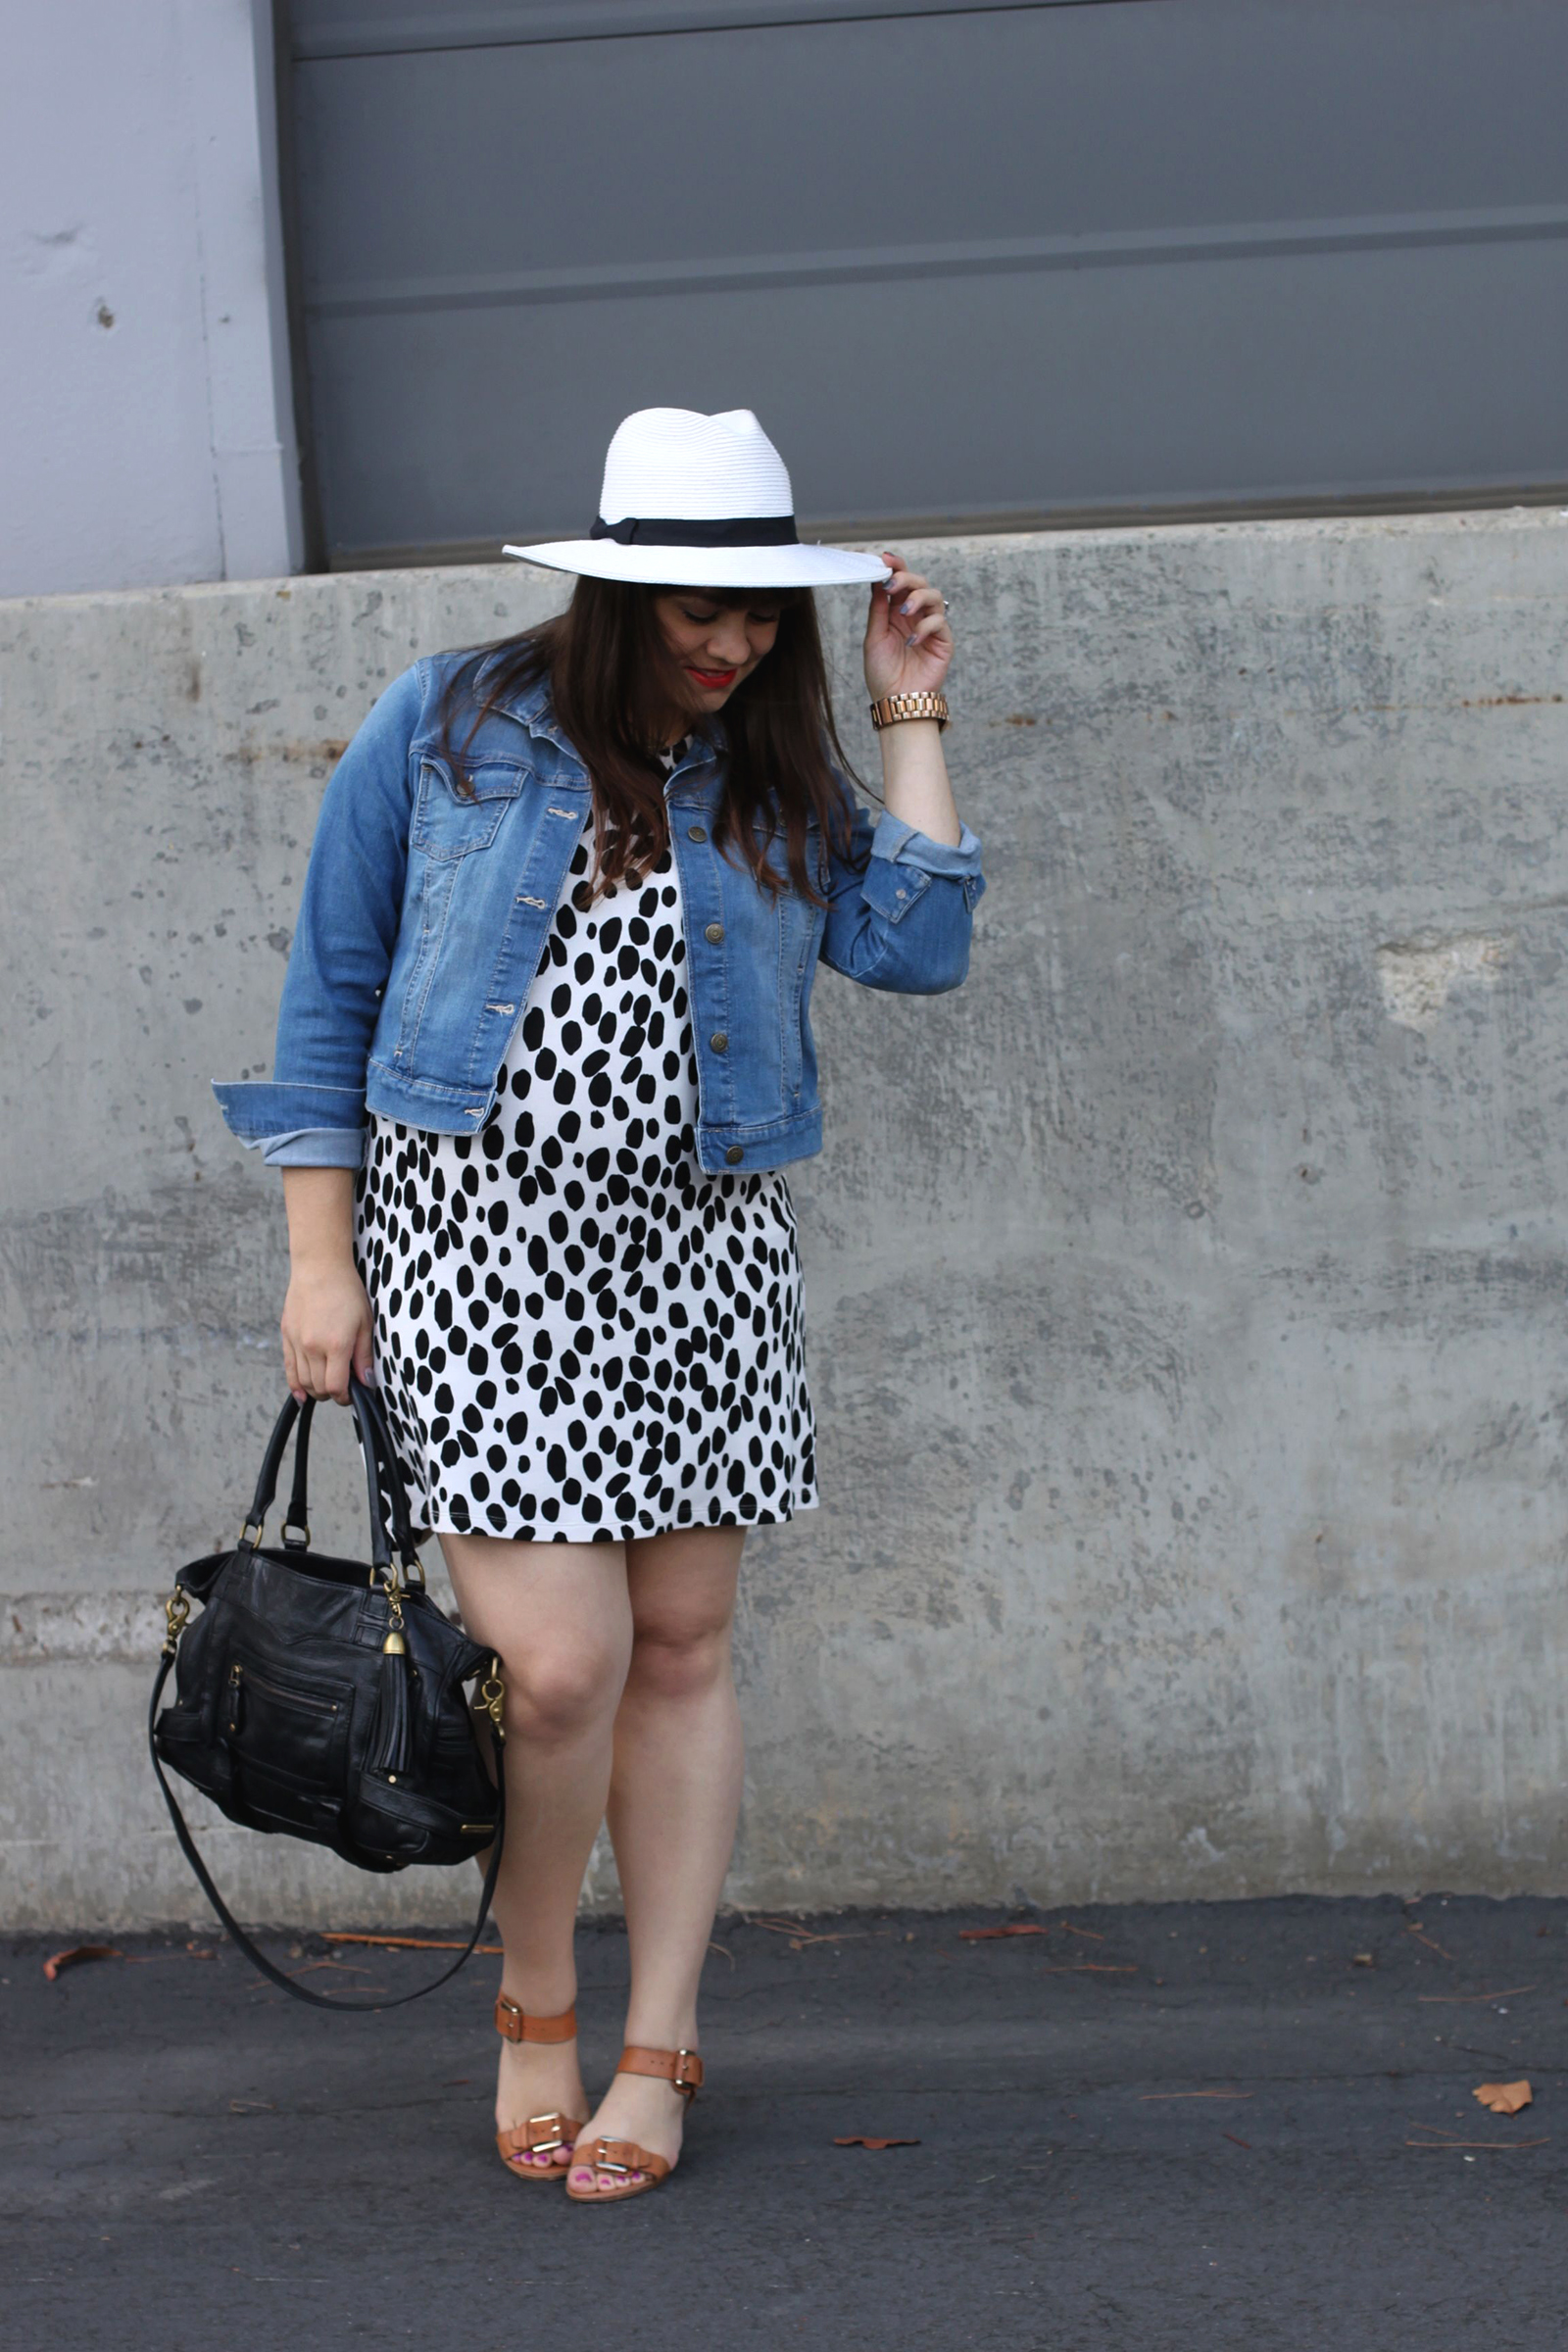 Maternity Remix: If the Hat Fits, Wear It